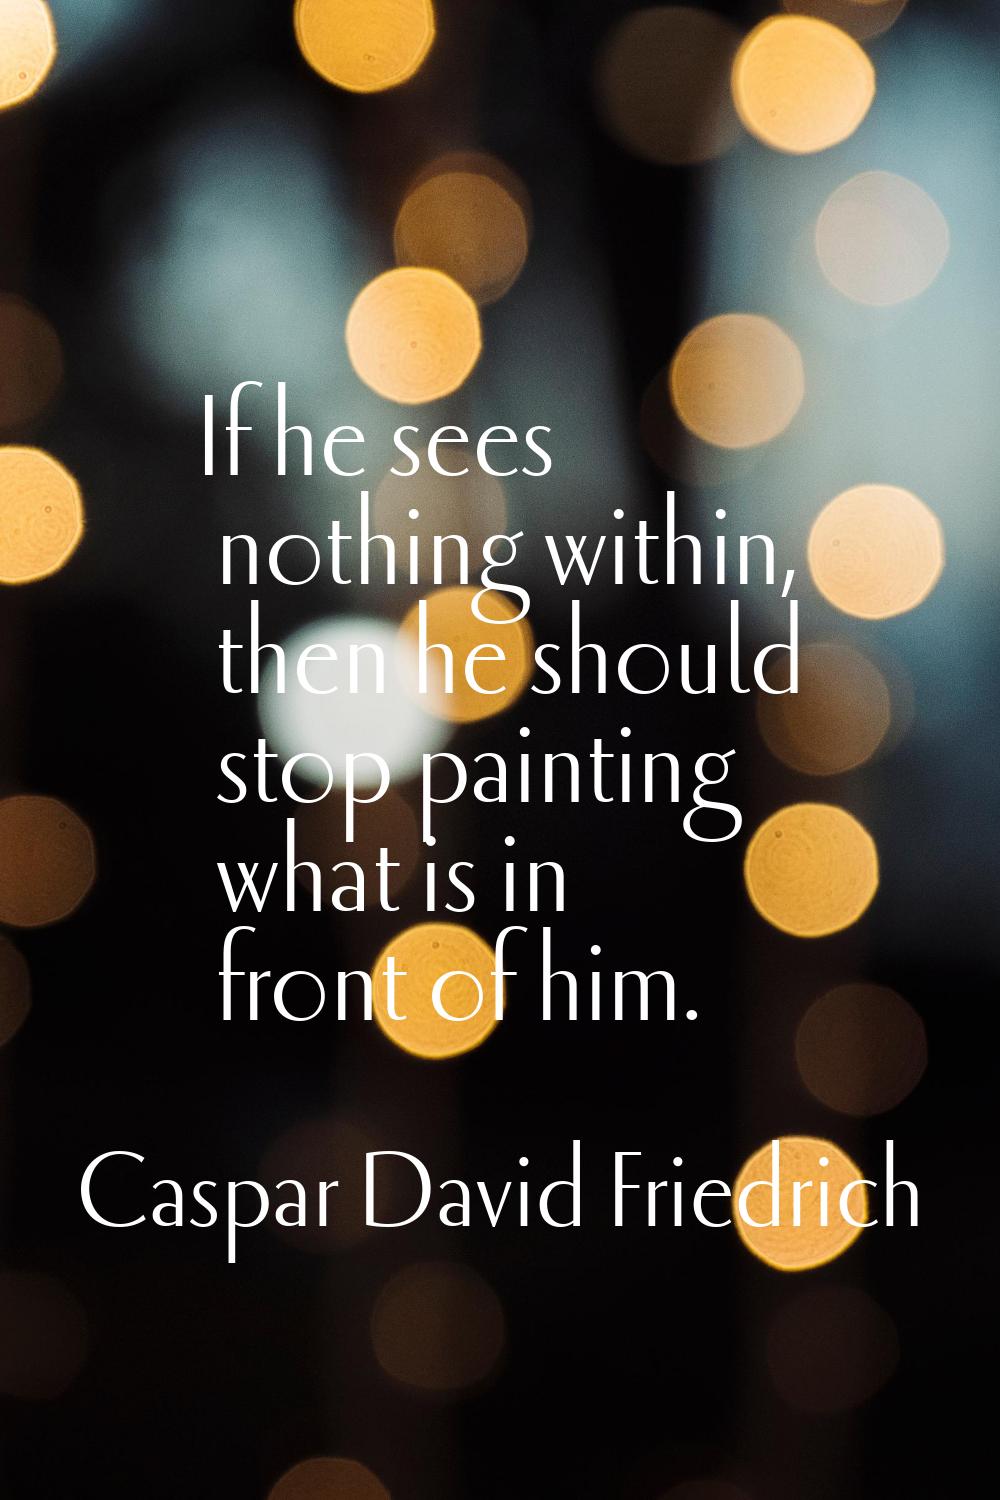 If he sees nothing within, then he should stop painting what is in front of him.